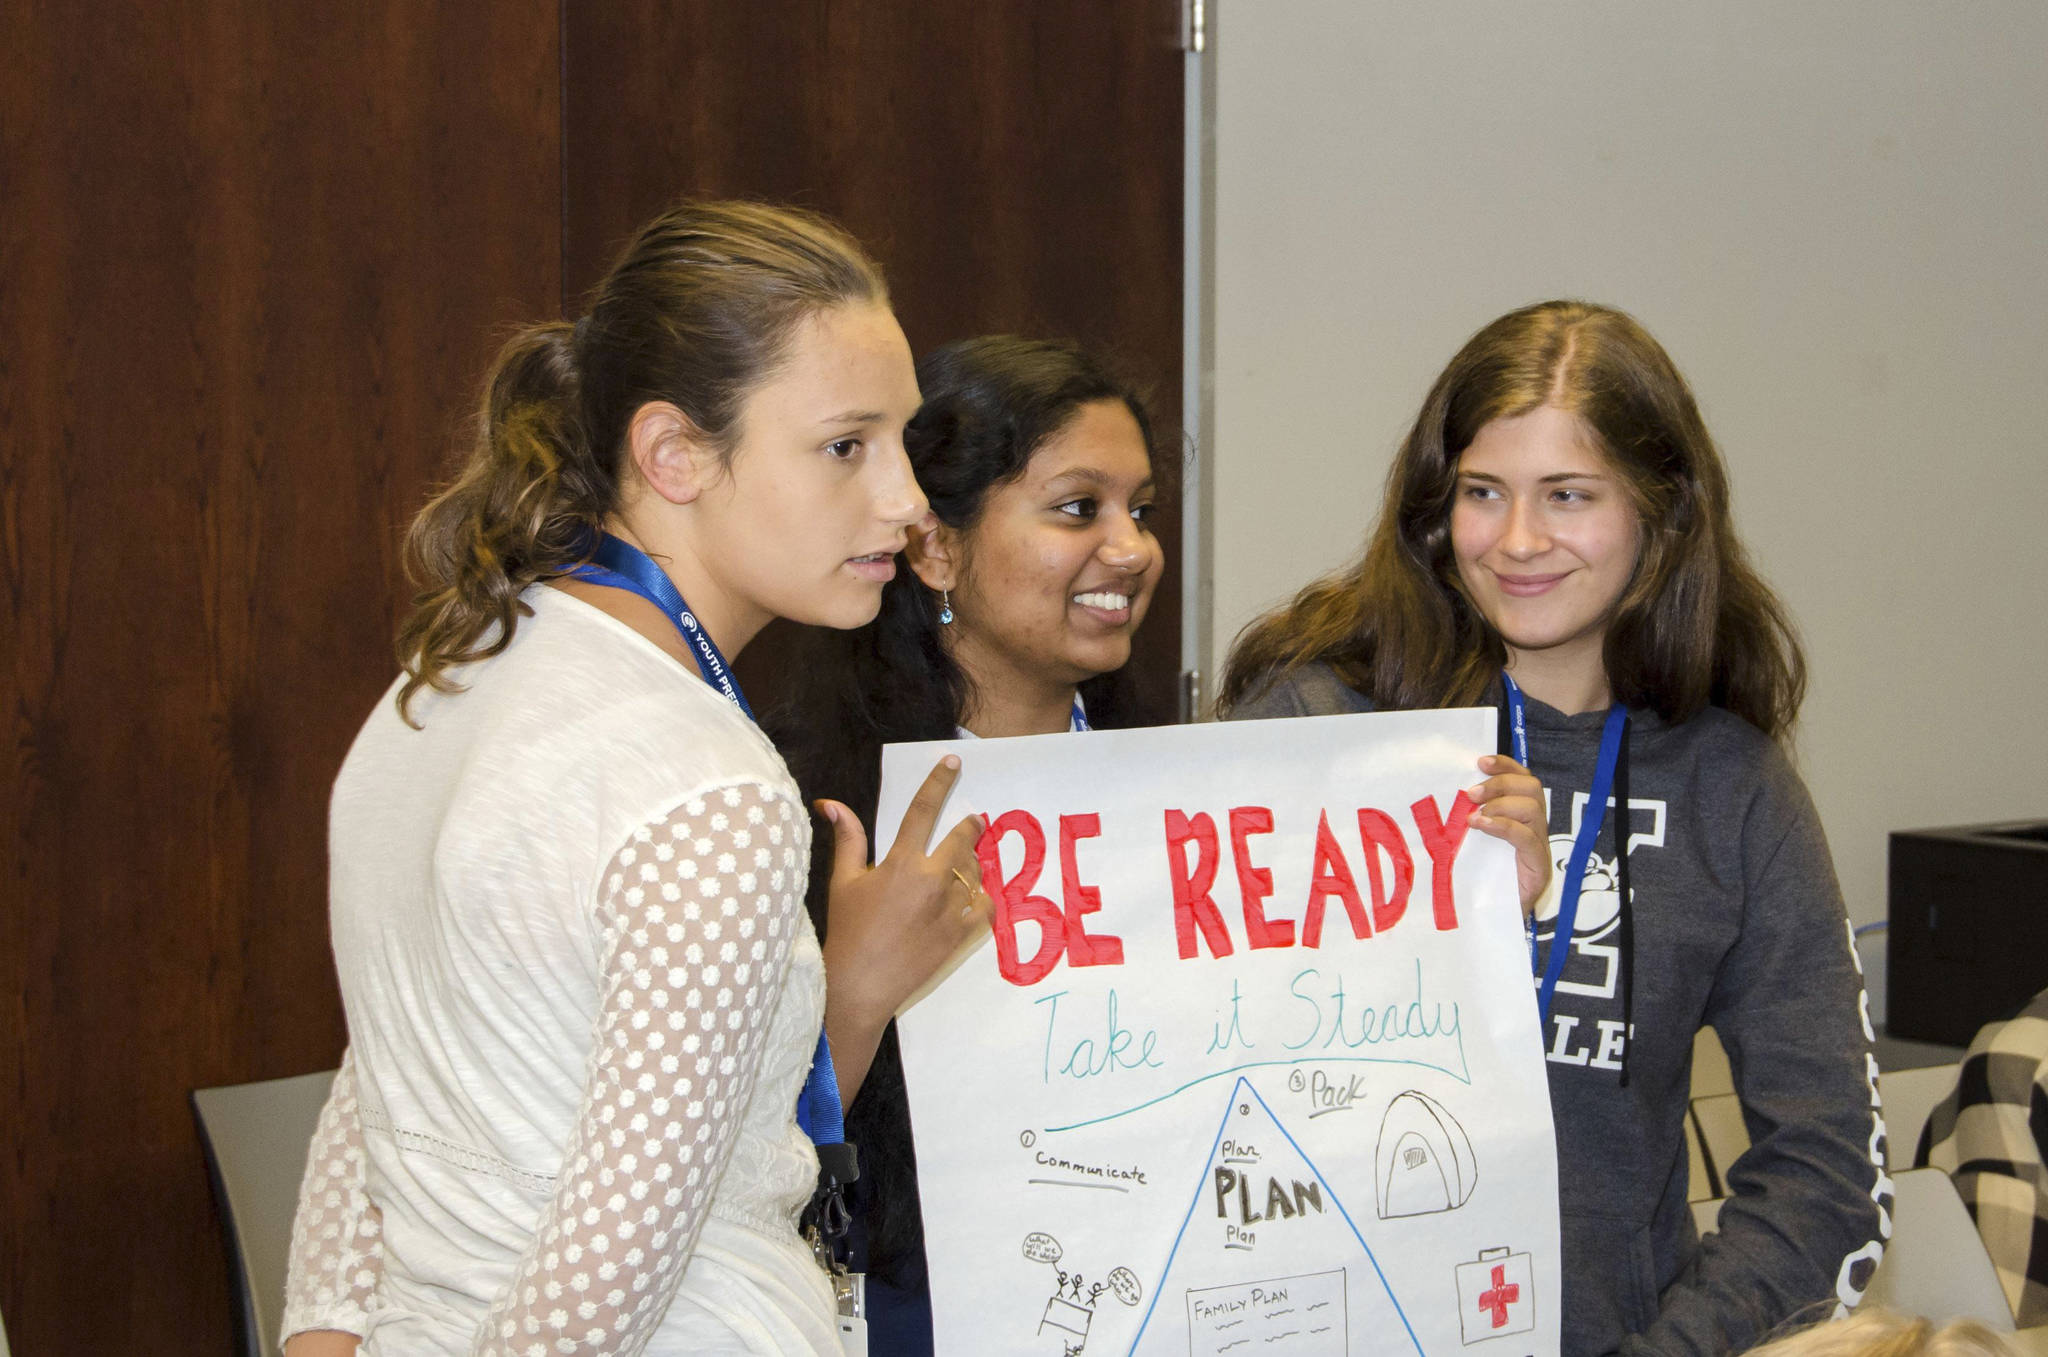 (Right to left) Gabrielle Karber, Ritusha Samal and Teagan Grabish show off the disaster preparedness poster their group developed as part of a short activity at FEMA. Photo courtesy of FEMA Region 10, Jeffrey Markham